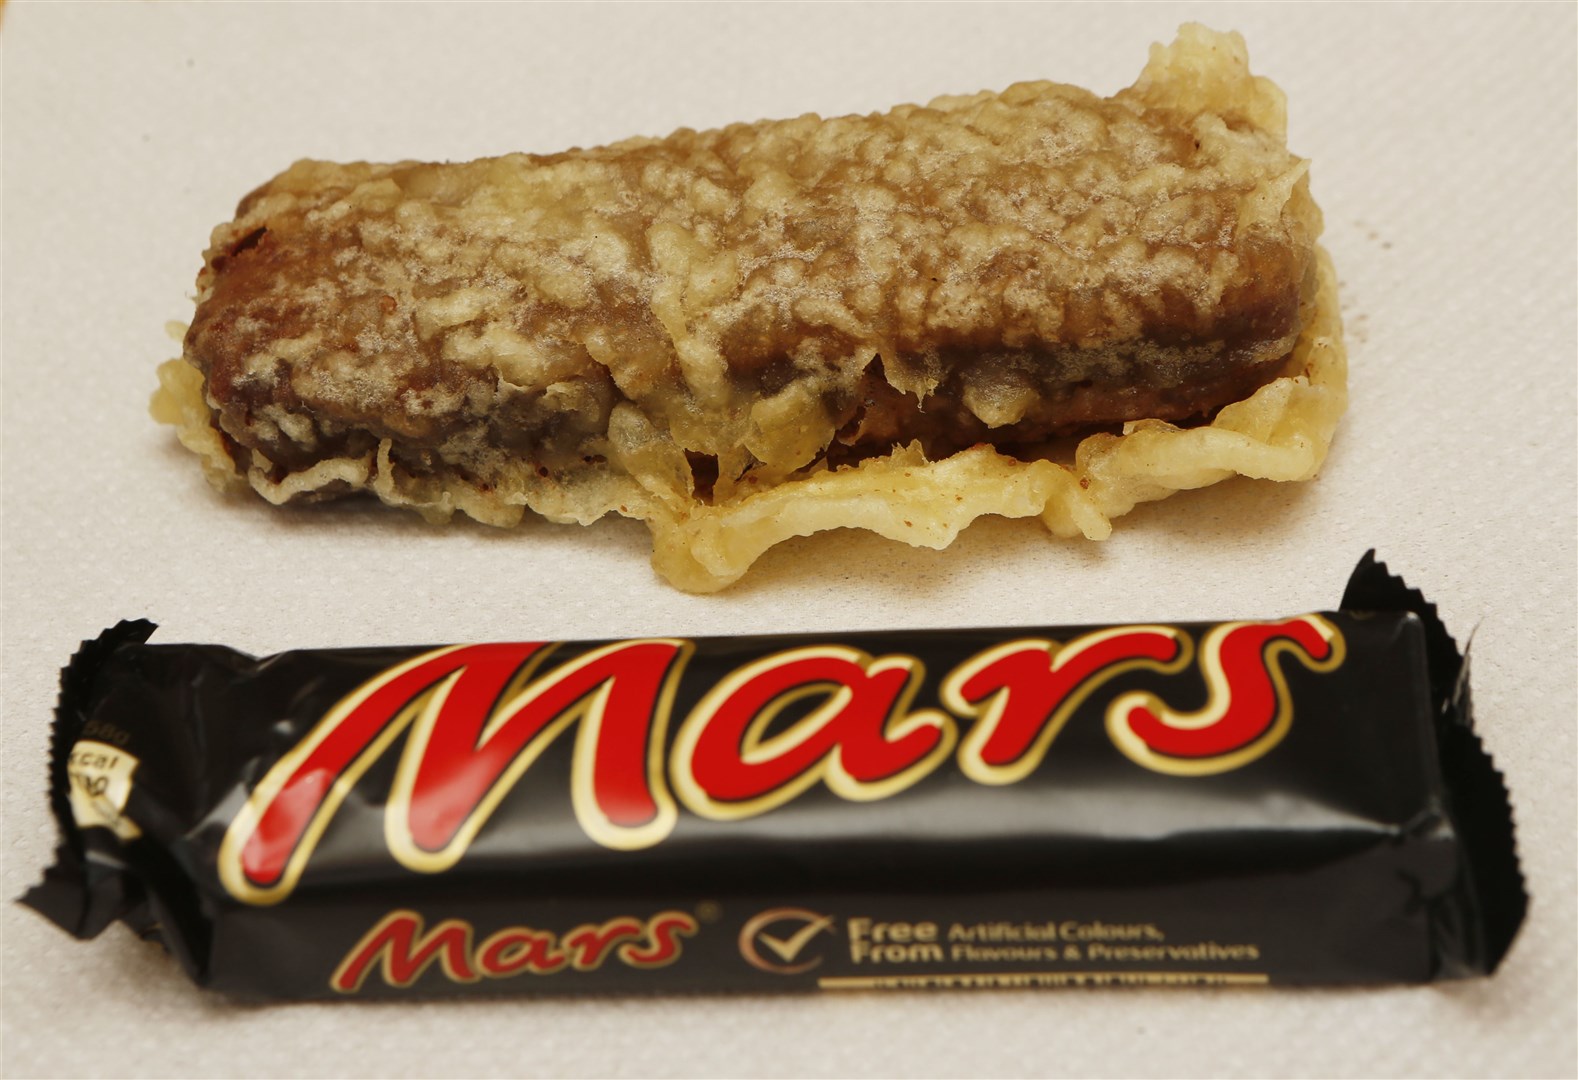 A deep fried Mars bar is prepared in a Glasgow chip shop ahead of the Glasgow 2014 Commonwealth Games (Danny Lawson/PA)